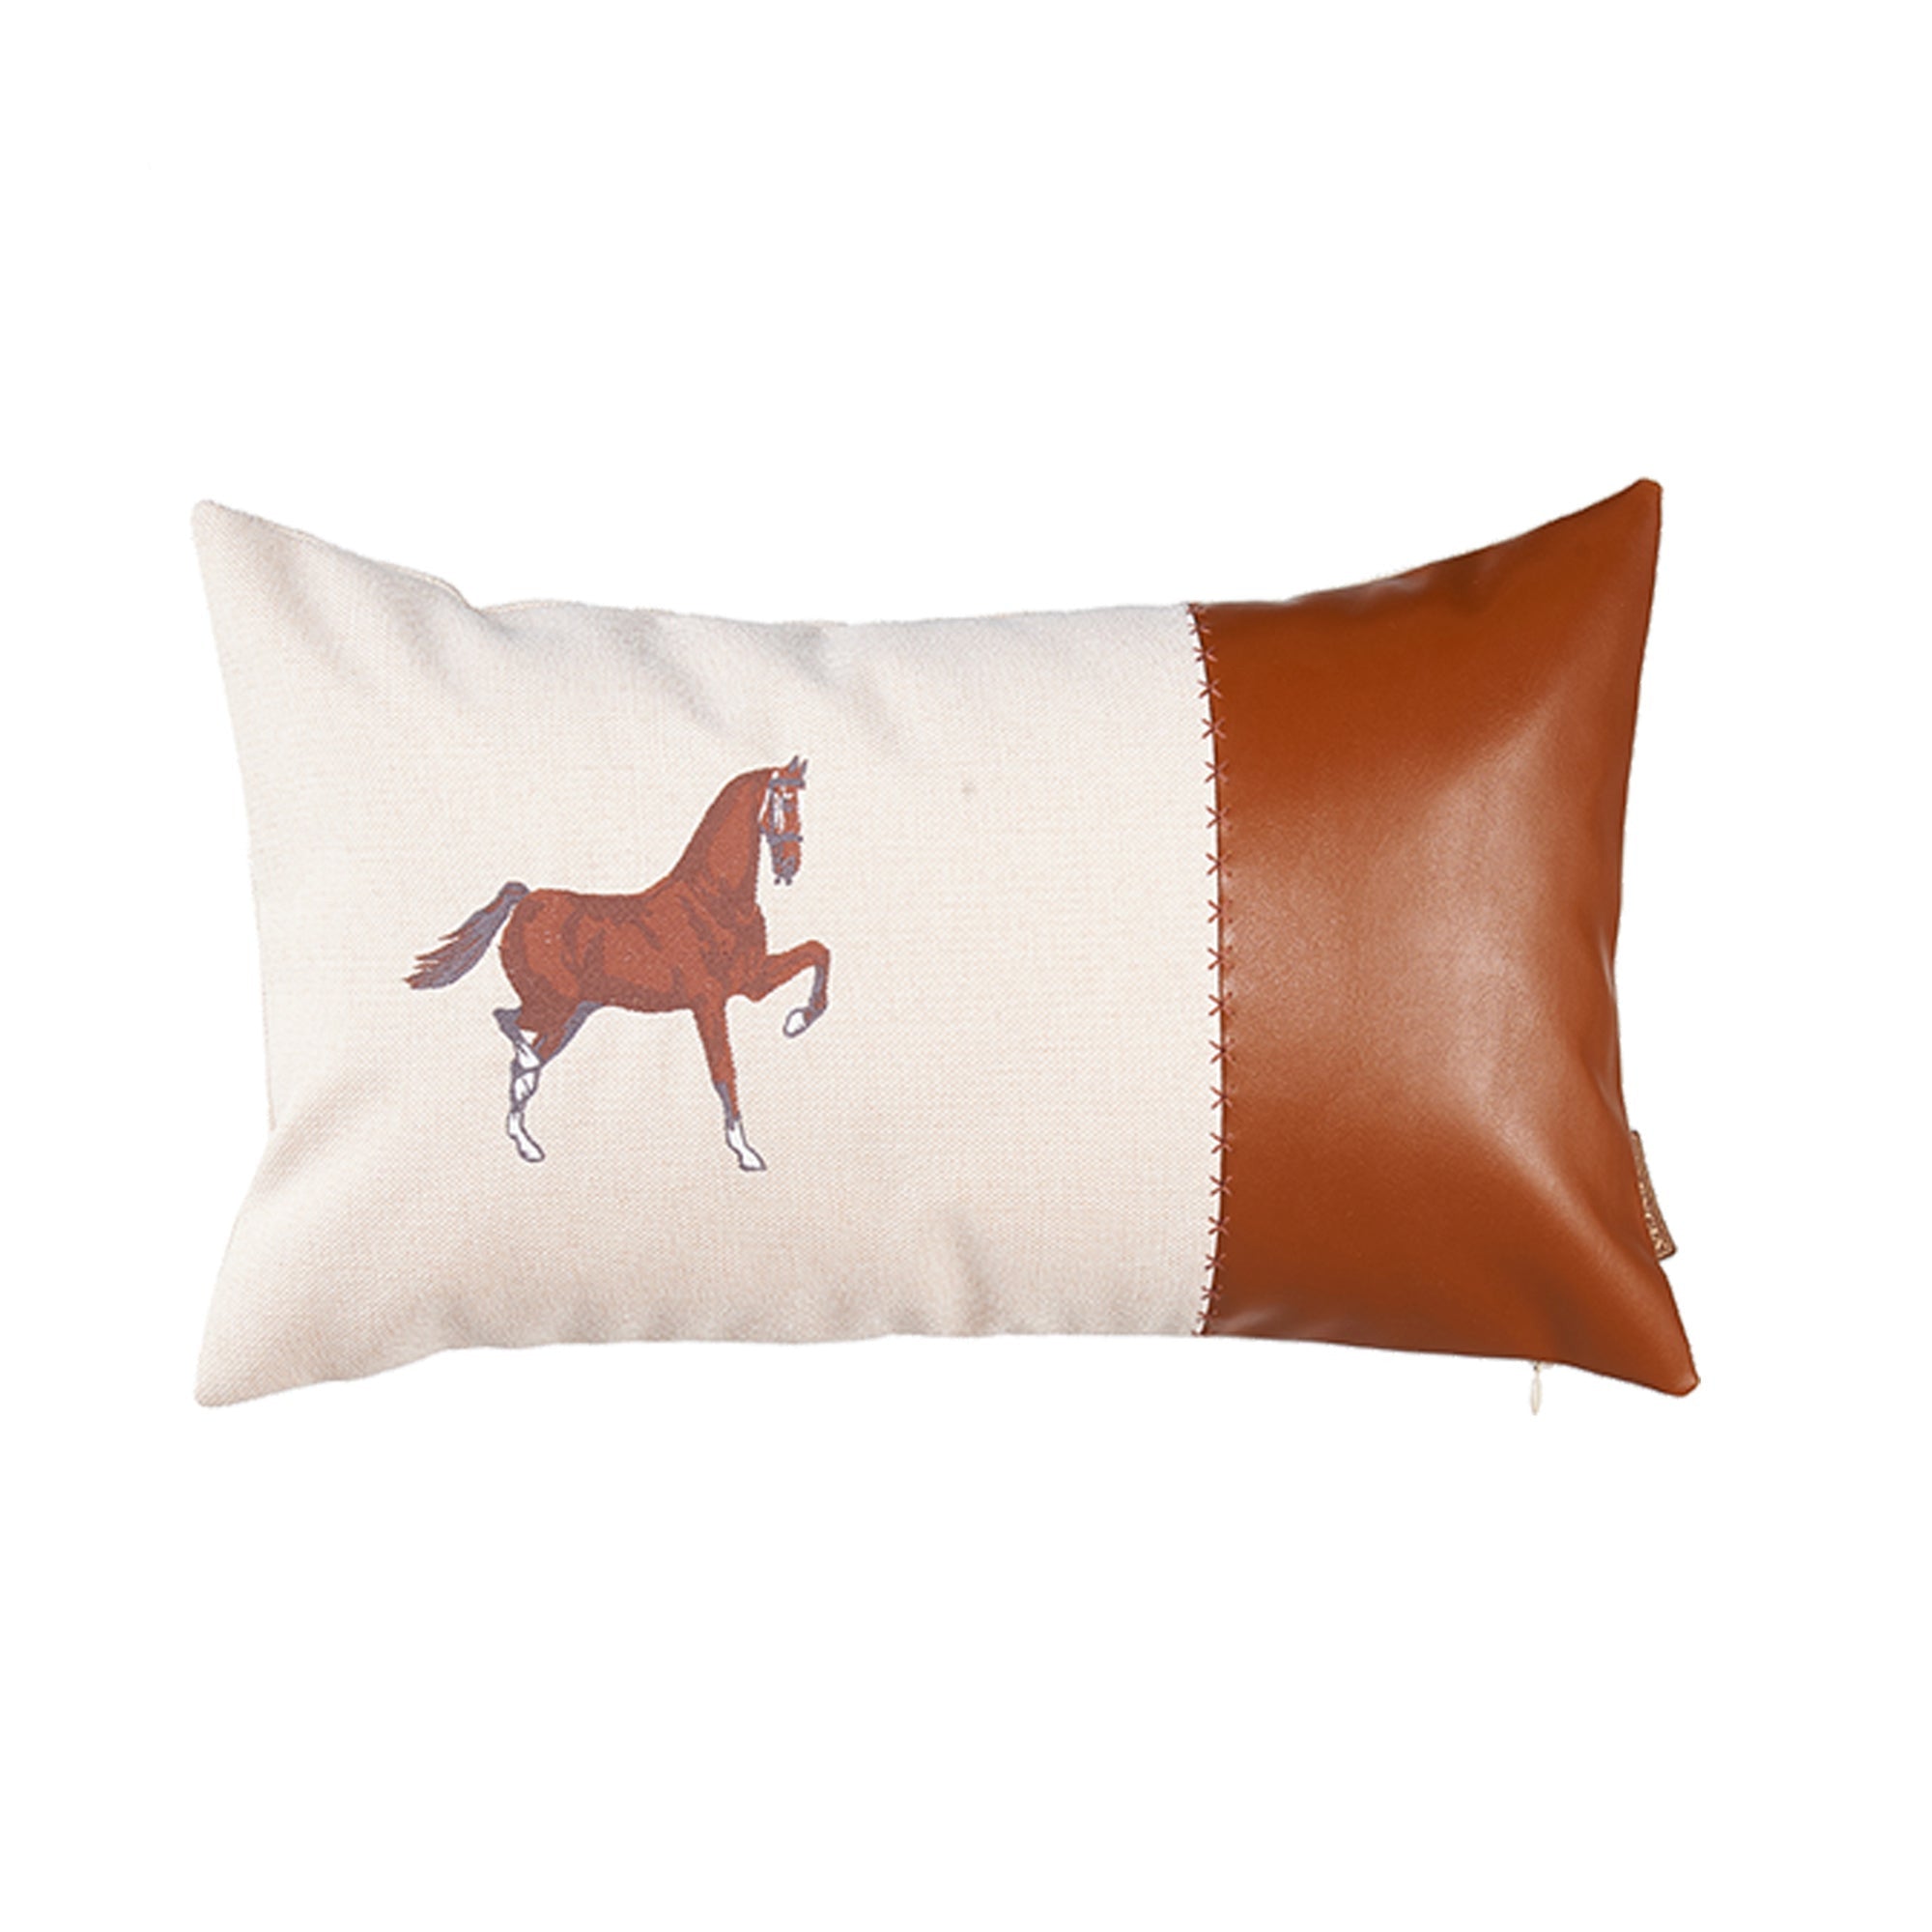 20" X 12" Beige Horse Animal Print Zippered Handmade Faux Leather Lumbar Pillow With Embroidery